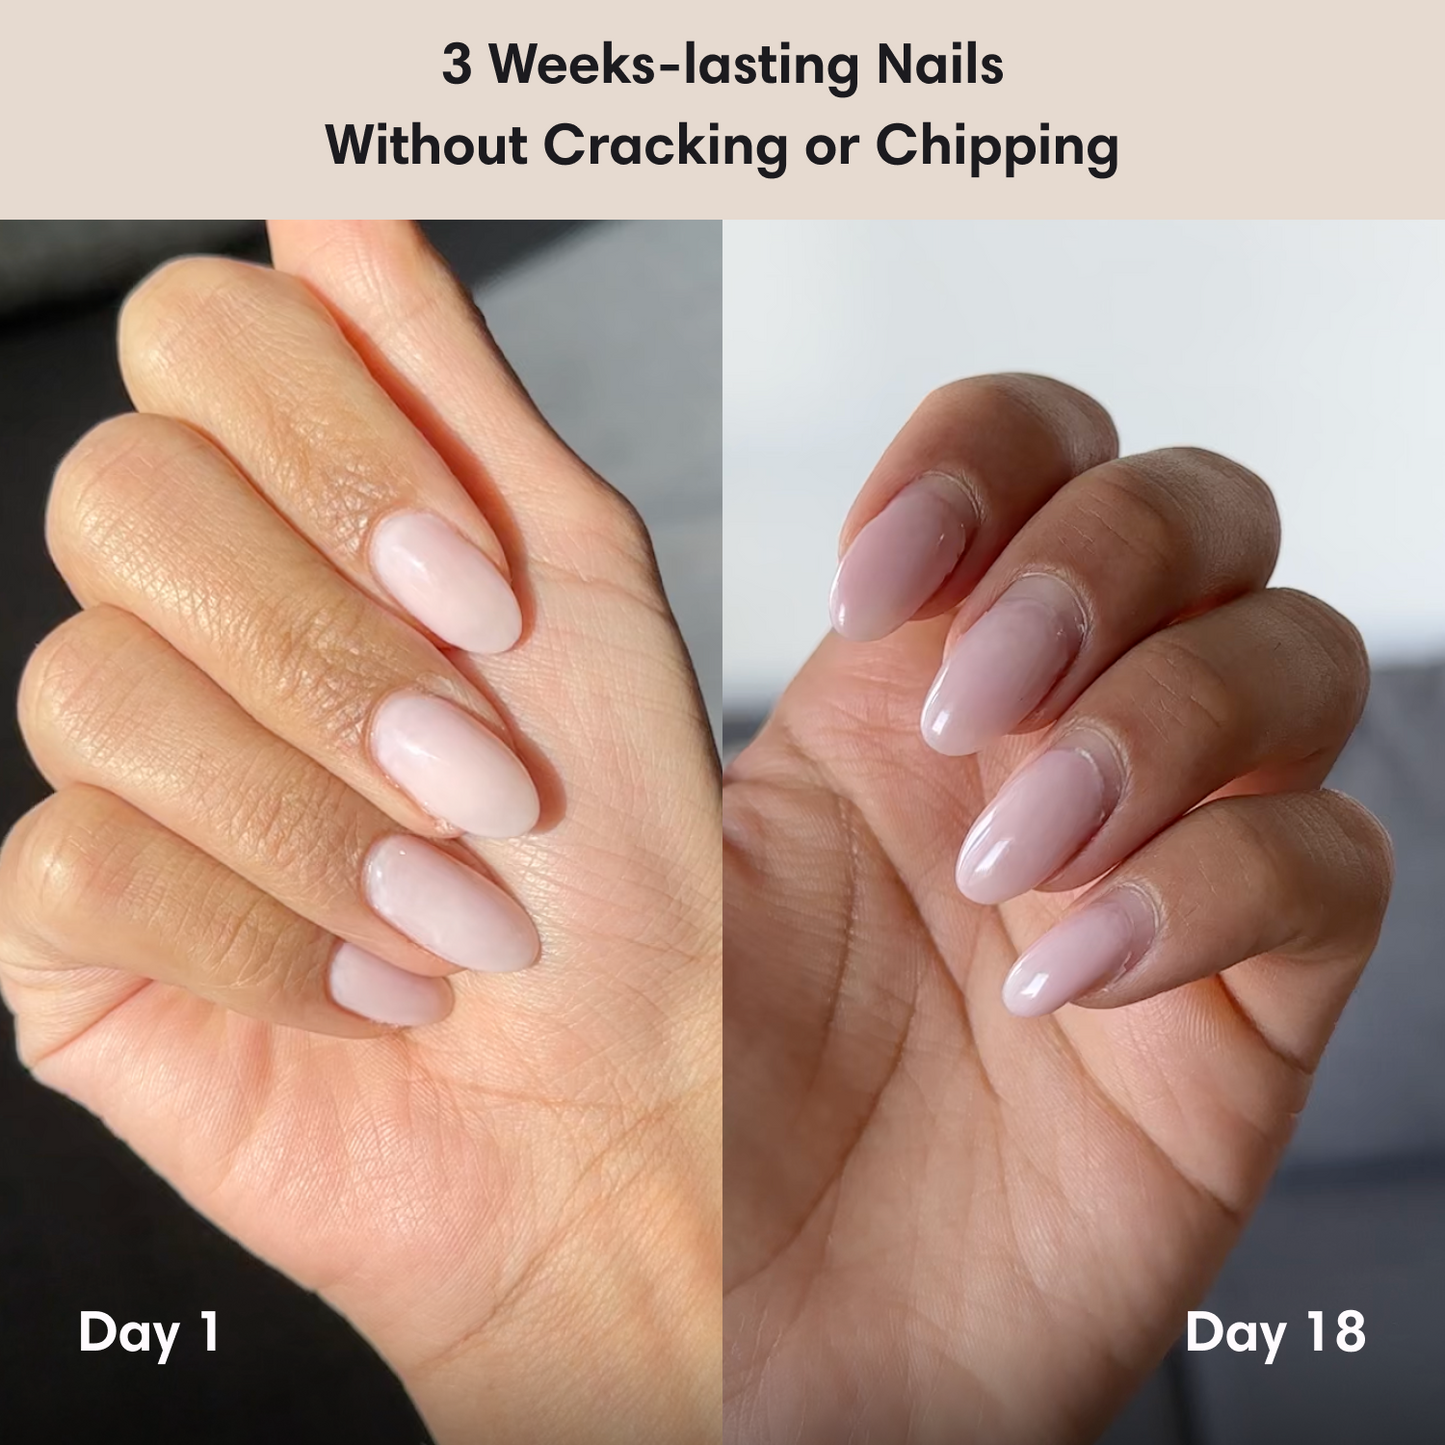 Side-by-side comparison of a nail treated with the polygel starter kit, showcasing day 1 and day 18 results. Text overlay promises long-lasting nails for up to 3 weeks without cracks or chips.